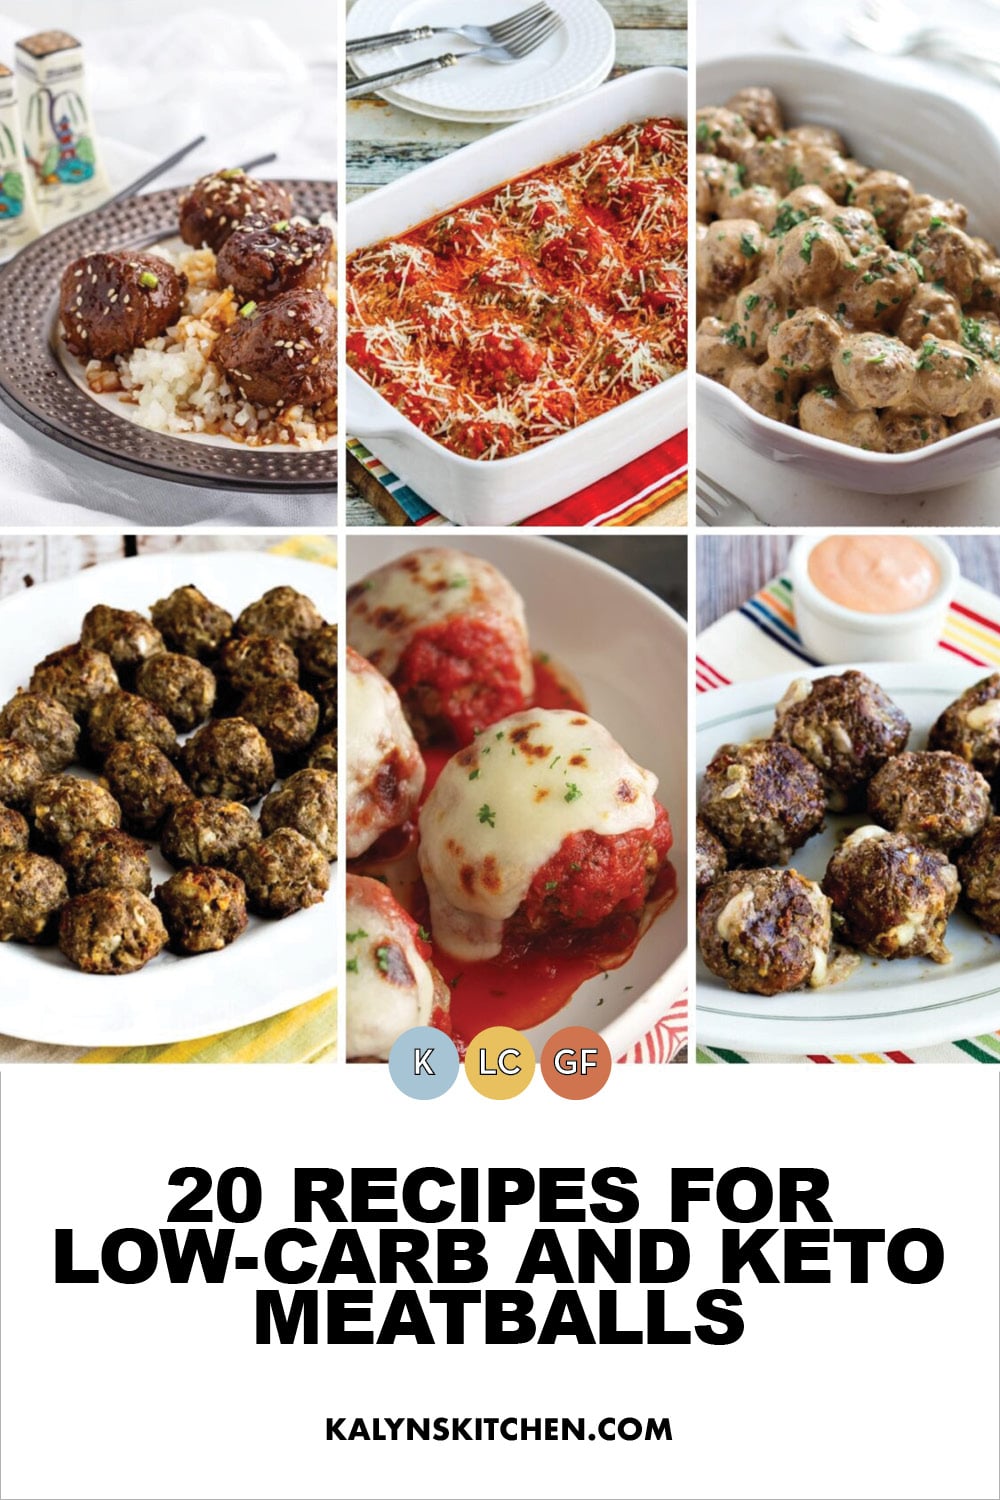 Pinterest image of 20 Recipes for Low-Carb and Keto Meatballs